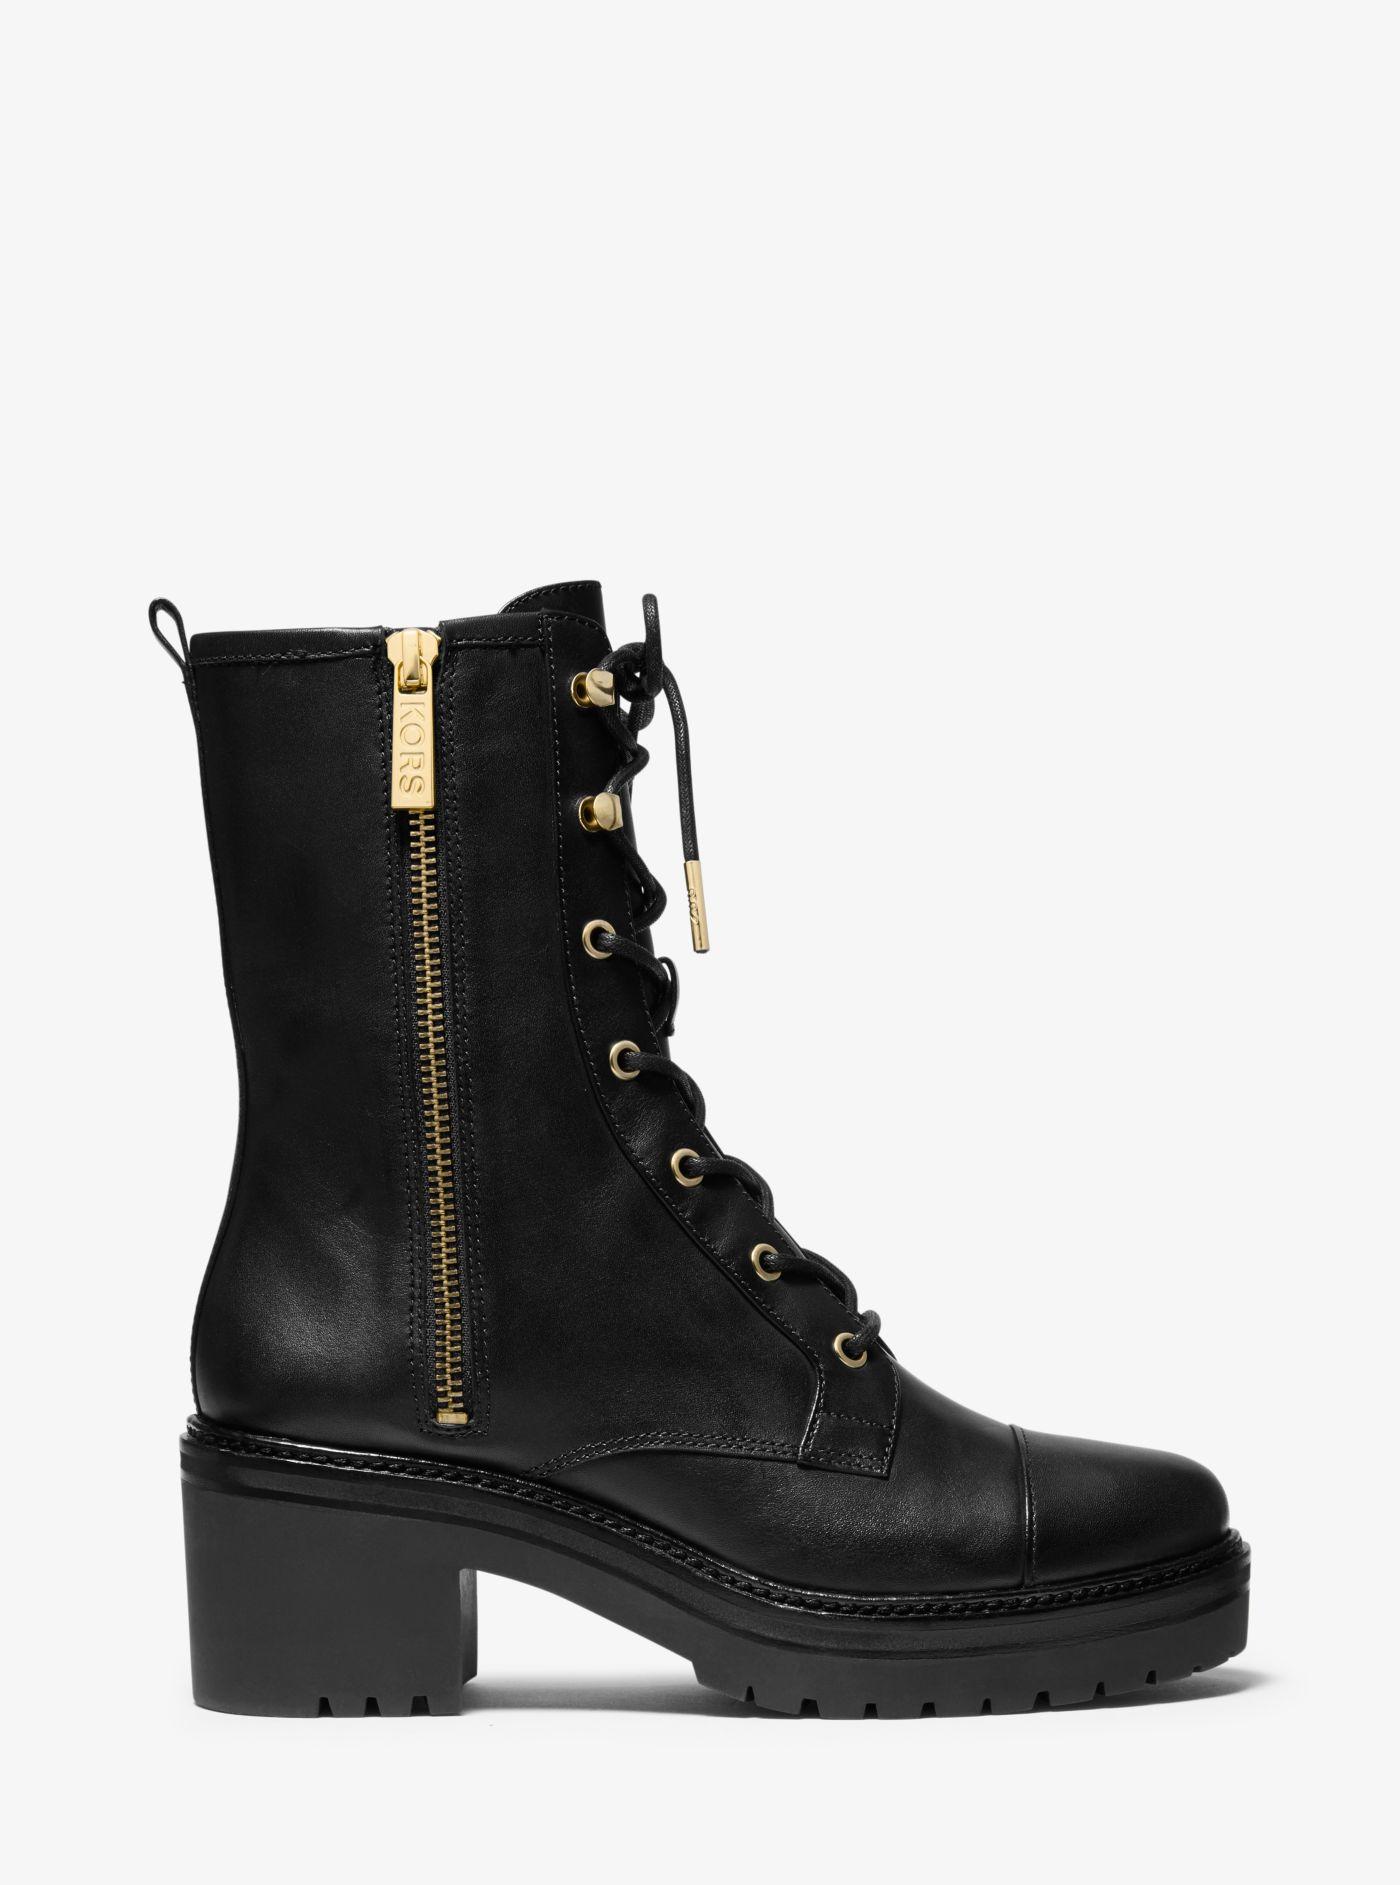 Michael Kors Anaka Leather Combat Boot in Black - Save 50% - Lyst